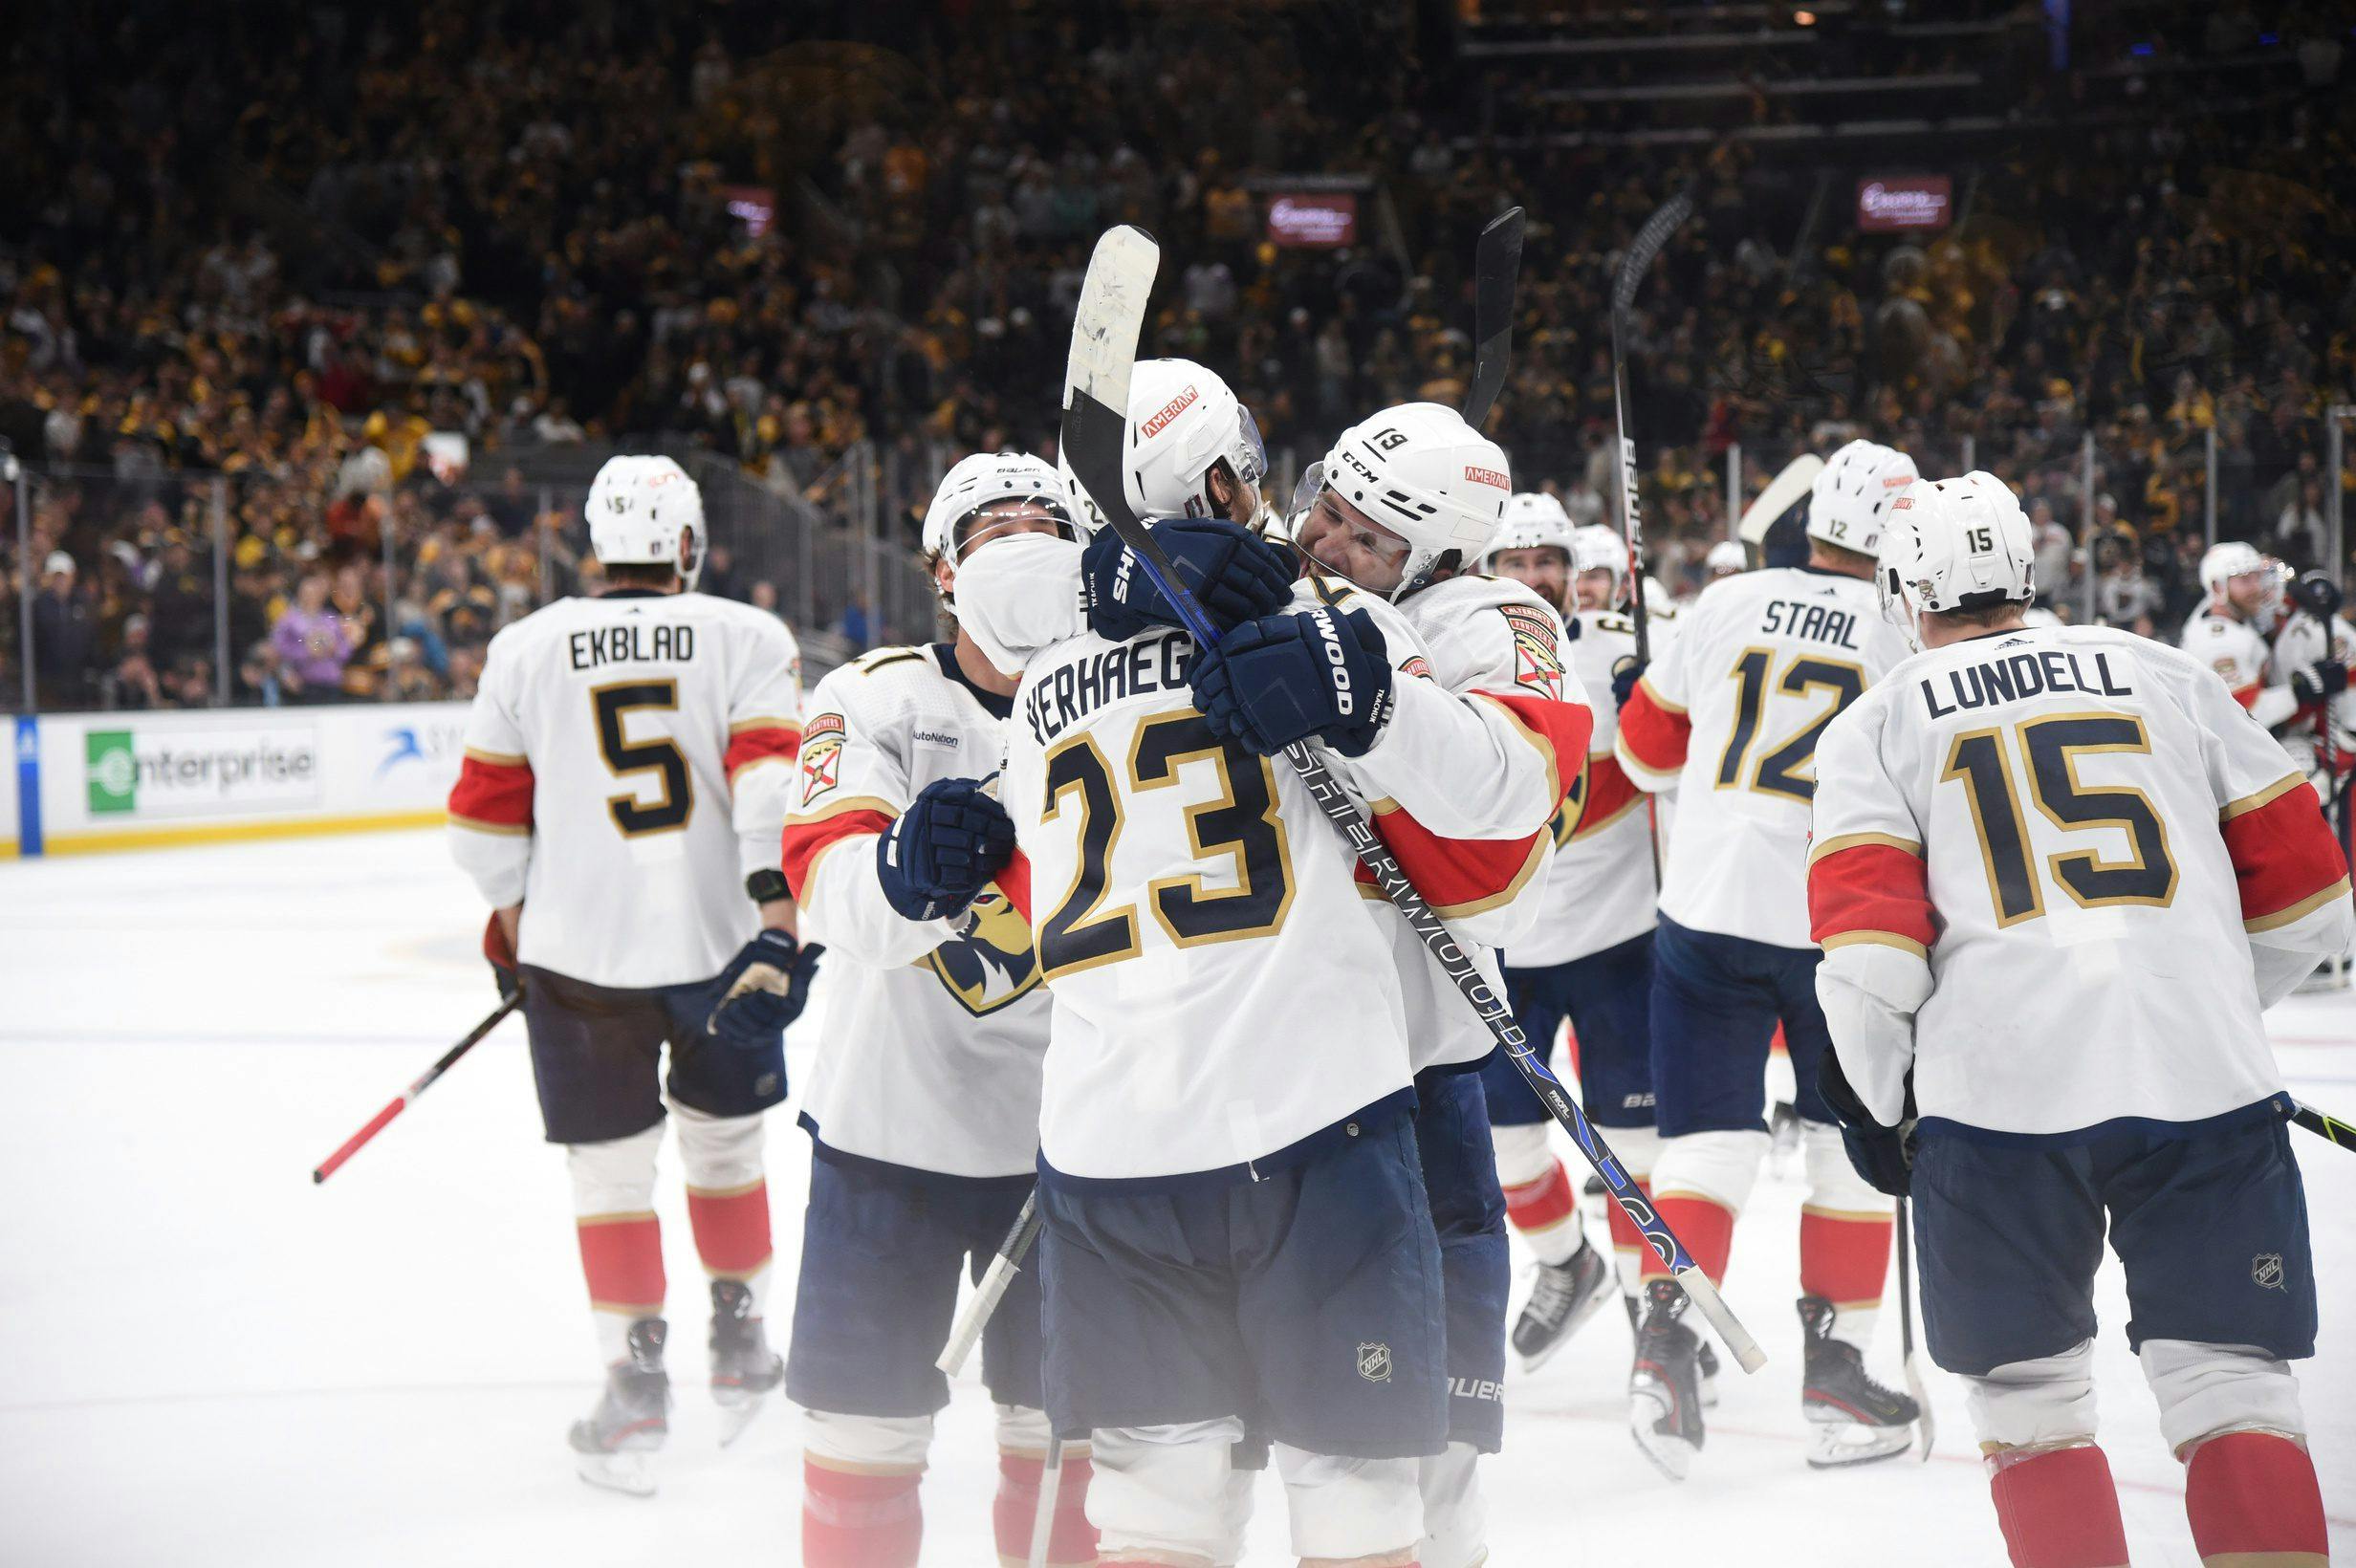 Stanley Cup Playoffs Day 14: Panthers and Kraken’s underdog stories continue after upset Game 7 victories